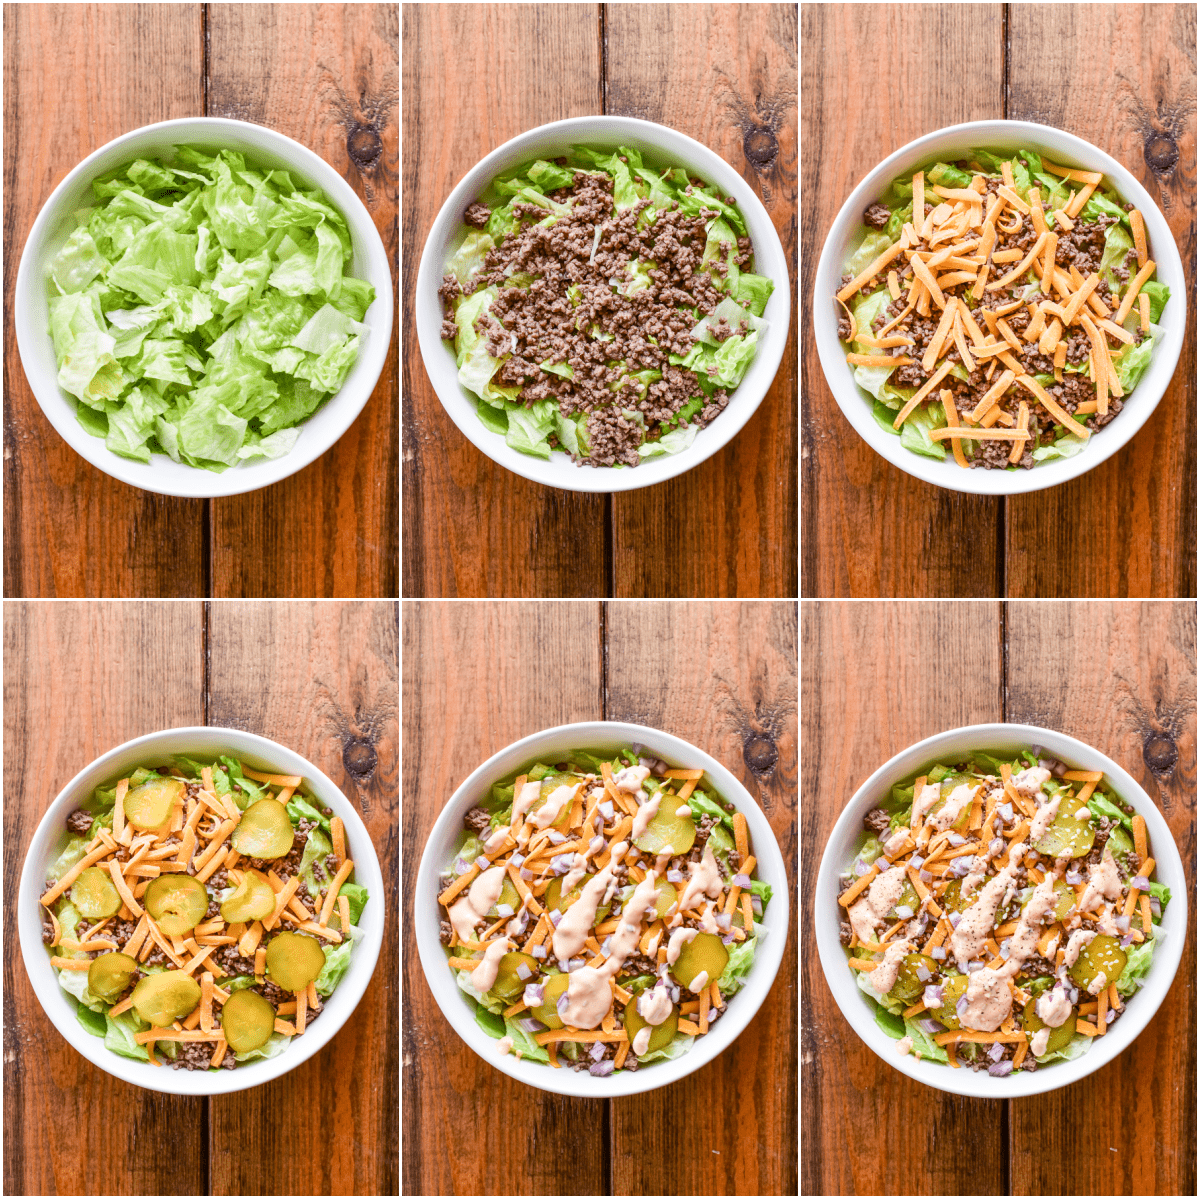 Step by step assembly of Big Mac Salad